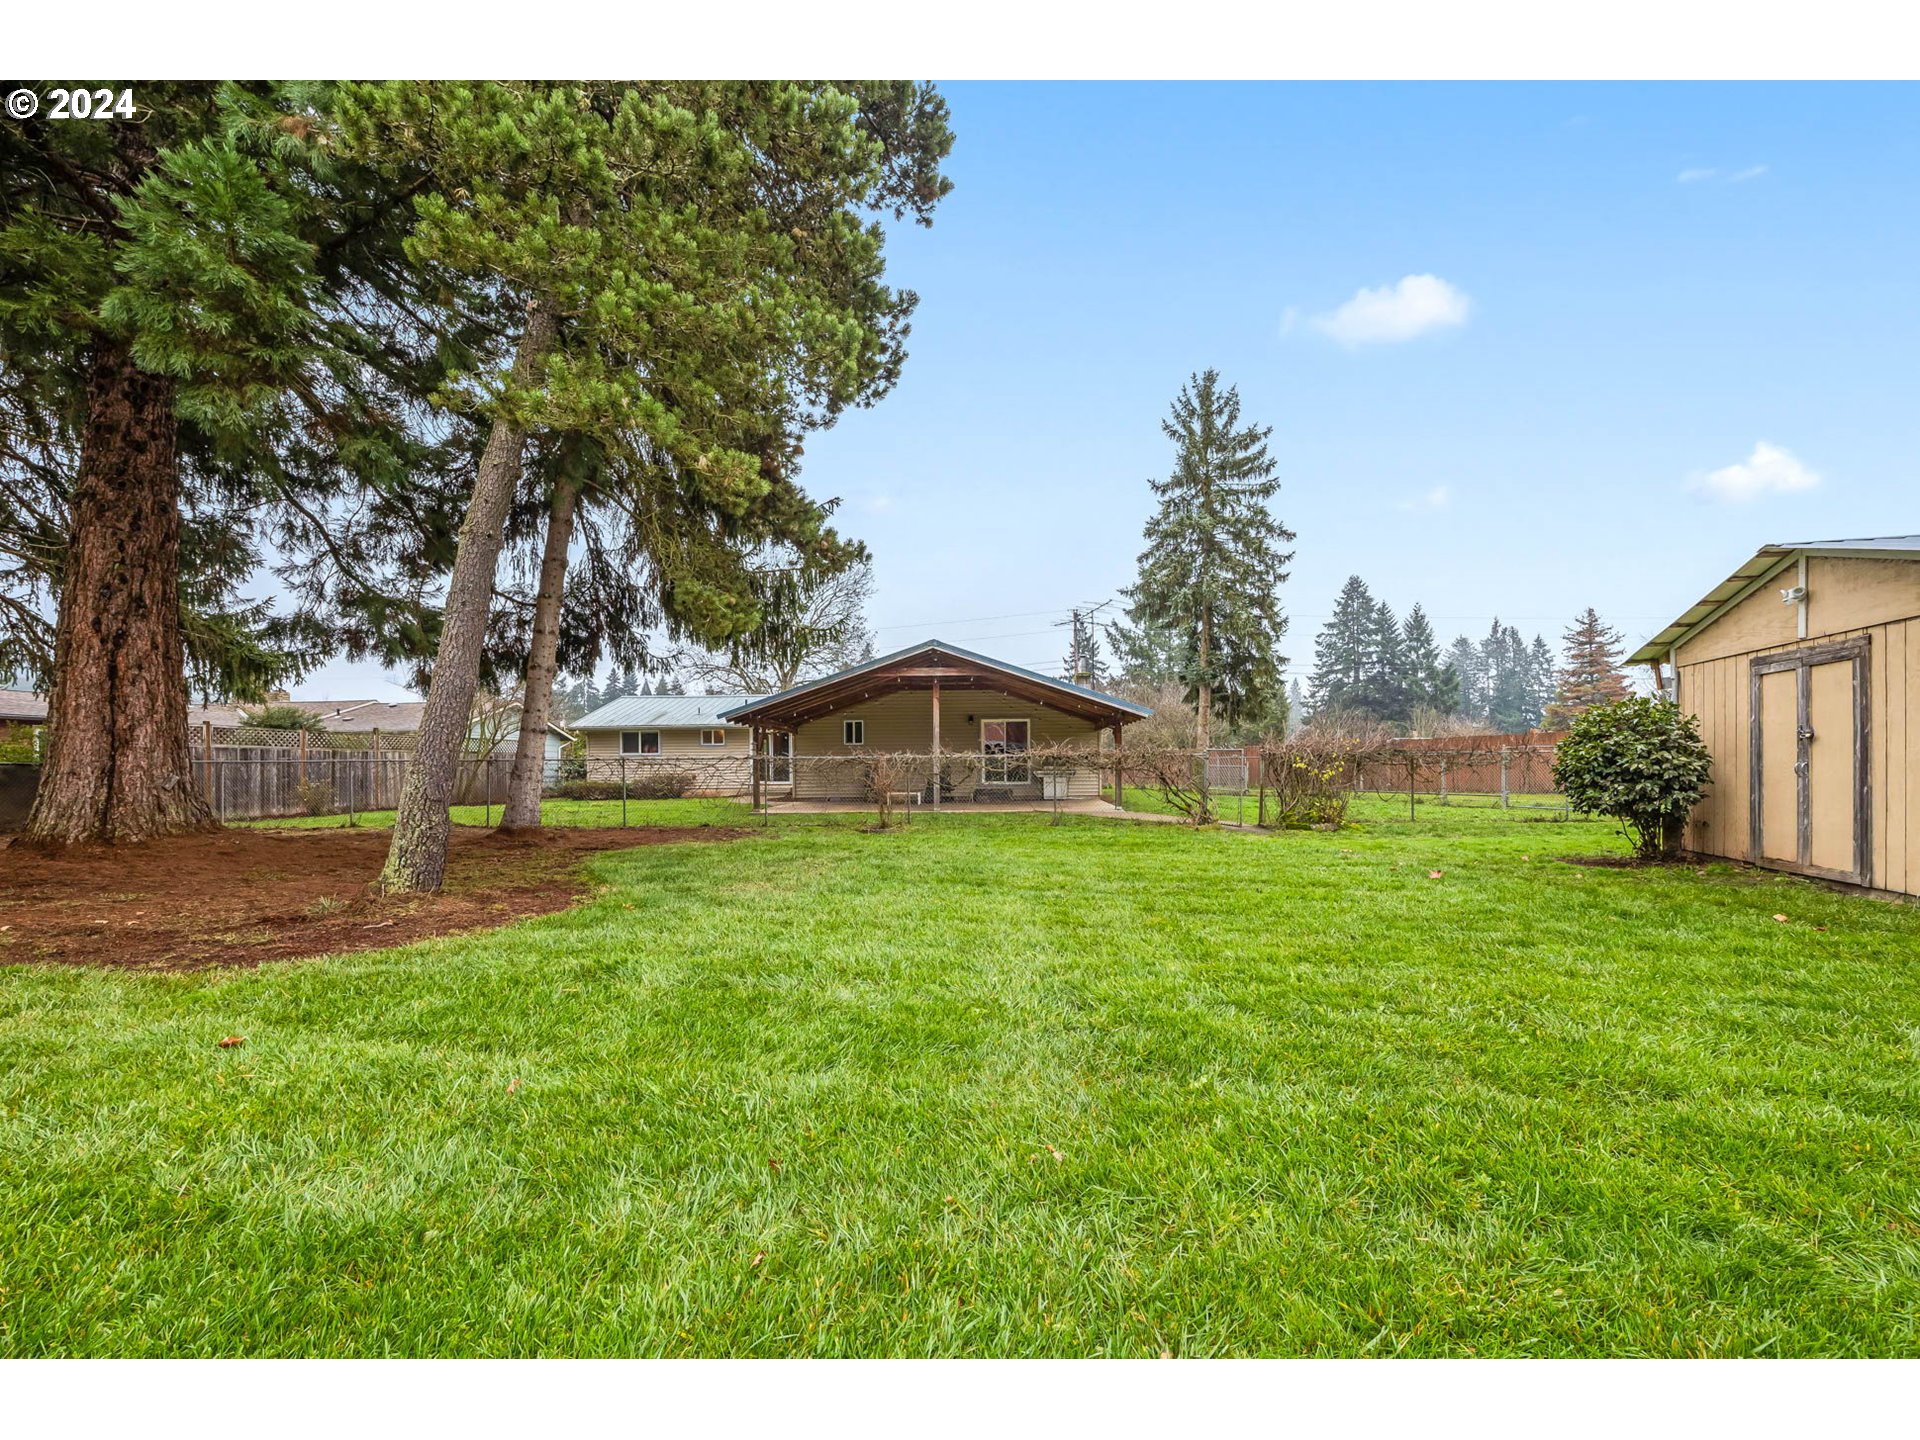 34747 SUNFLOWER CT, Cottage Grove, OR 